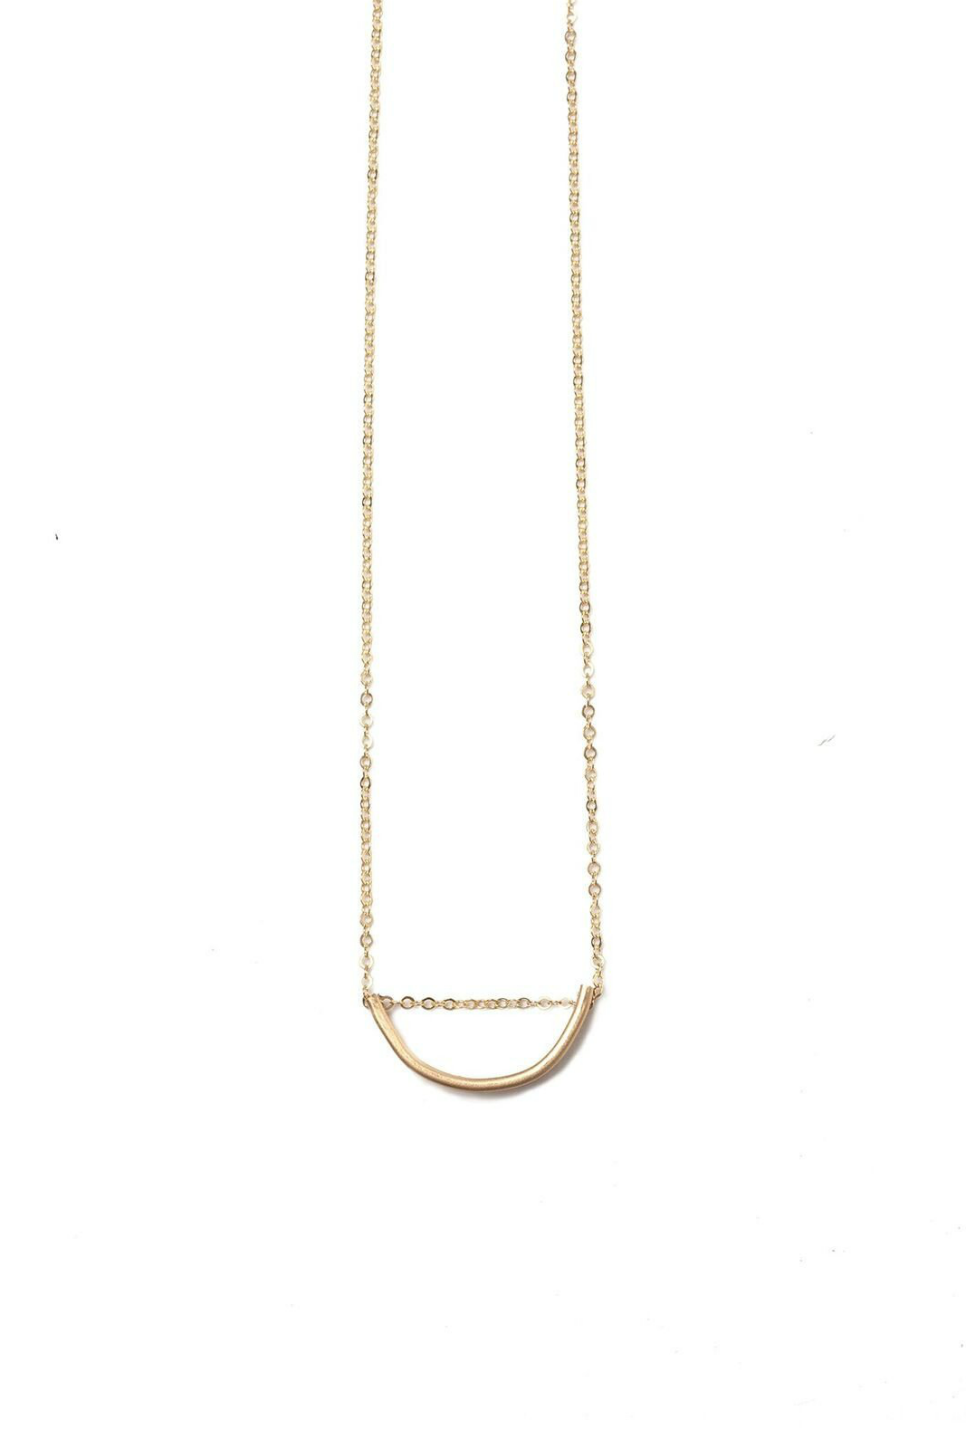 Able - Arch Necklace - Gold